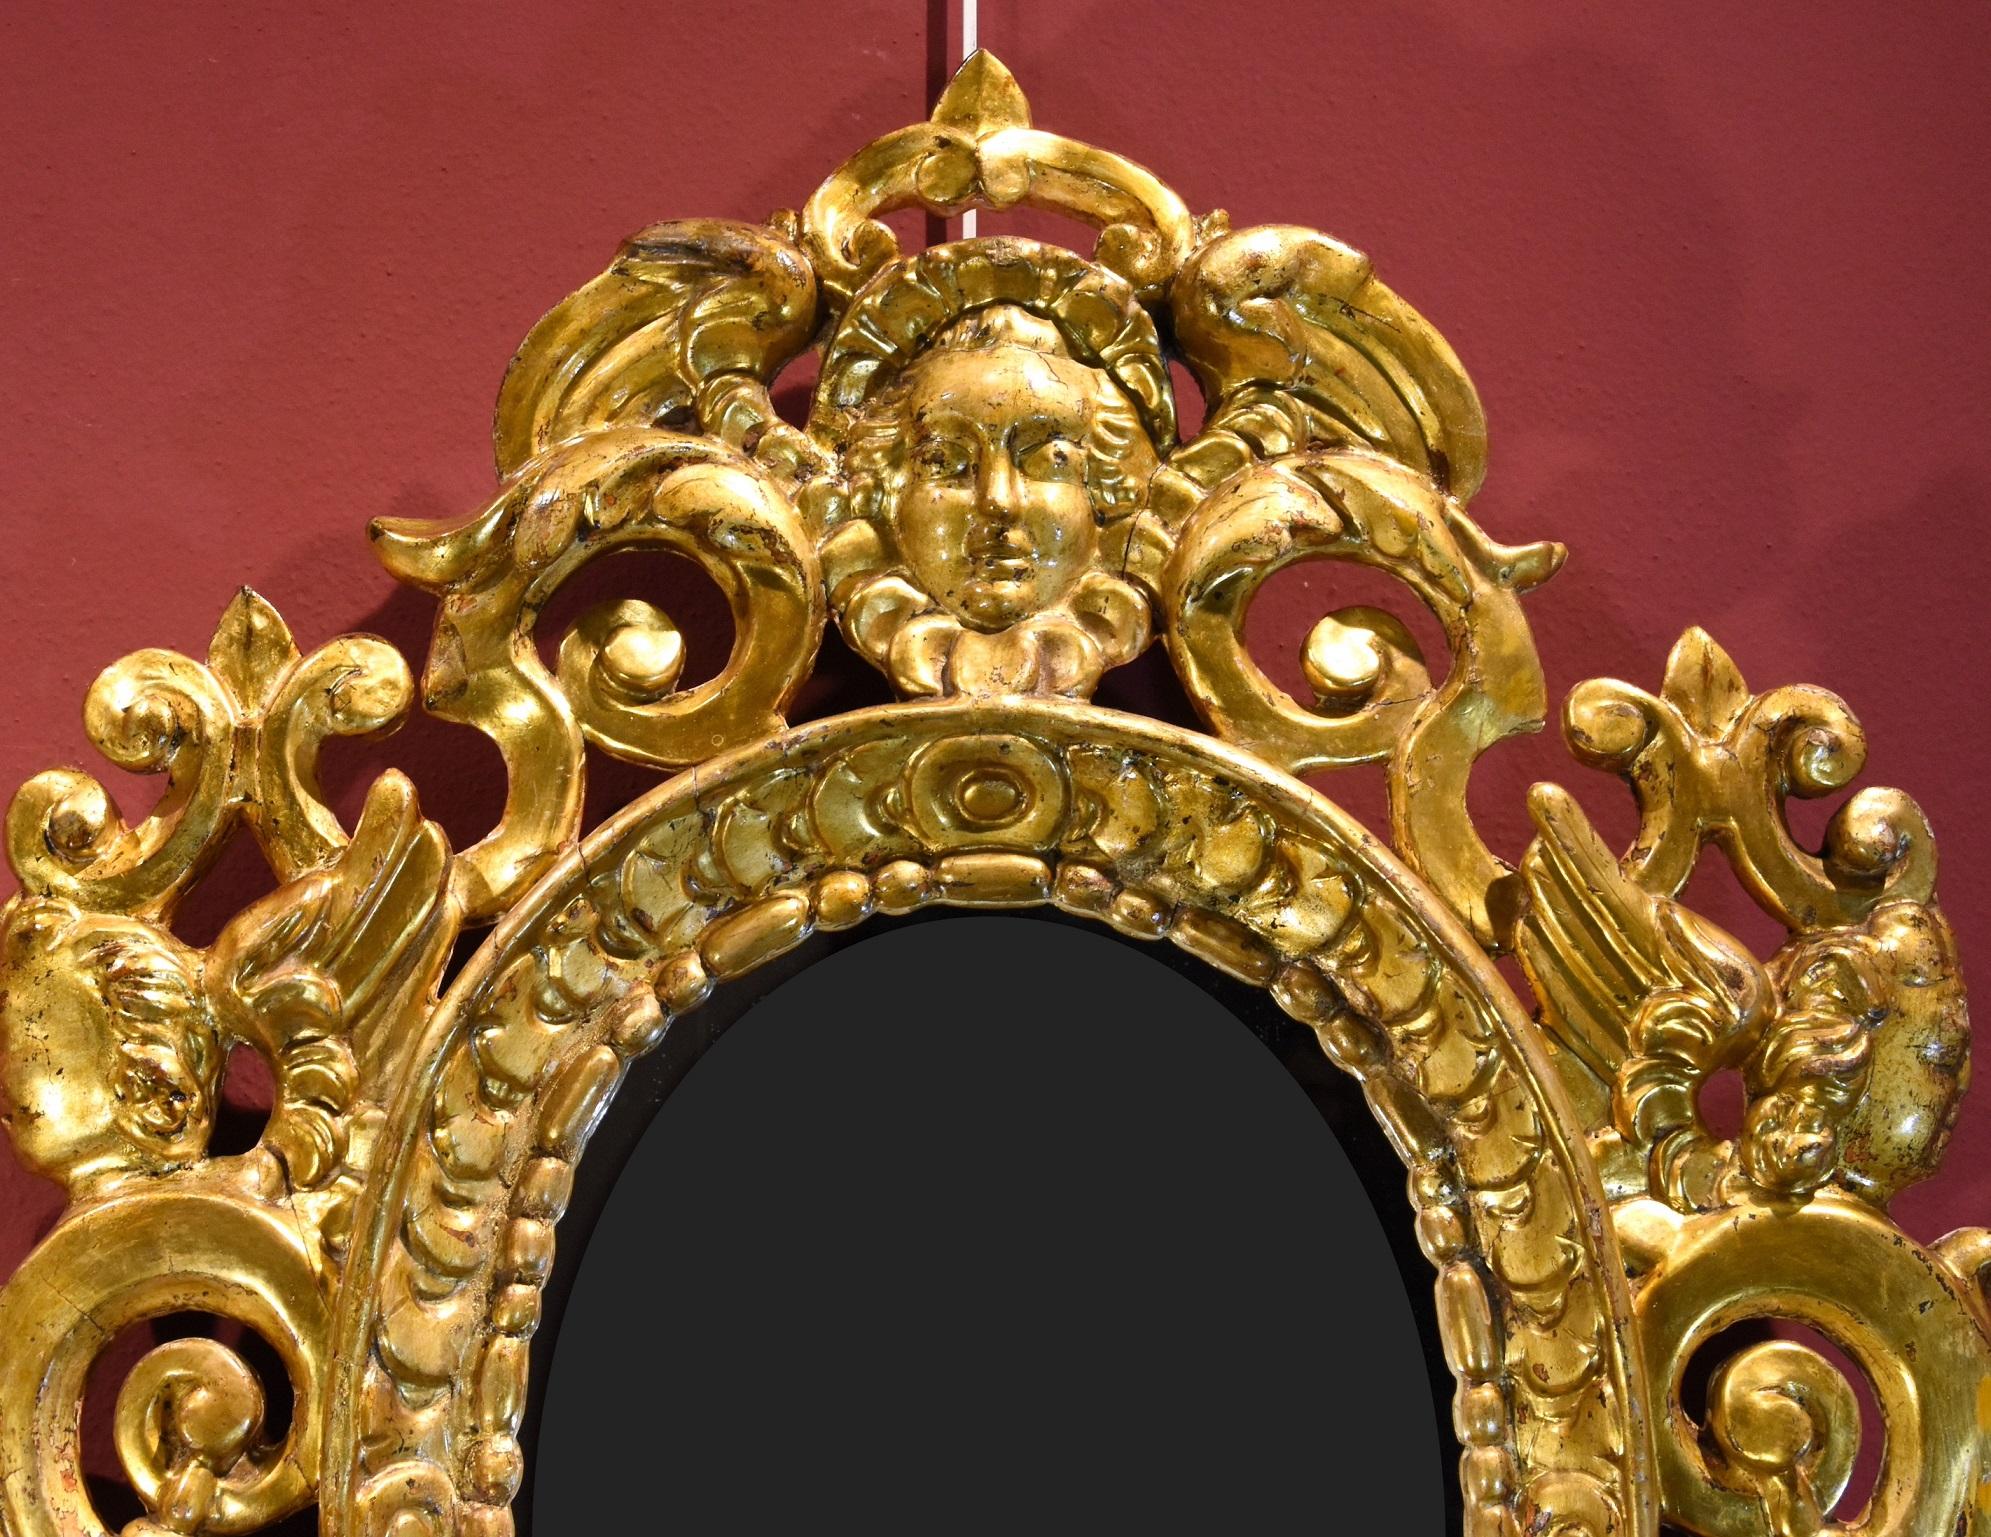 Pair of carved and gilded mirror cabinets 'in the manner of Sansovino'
Venetian (or Tuscan) carver active in the 18th century

Carved and gilded wood
Total frame measurements: 86 x 60 cm. /Internal measurements: 40 x 29 cm.

This precious pair of